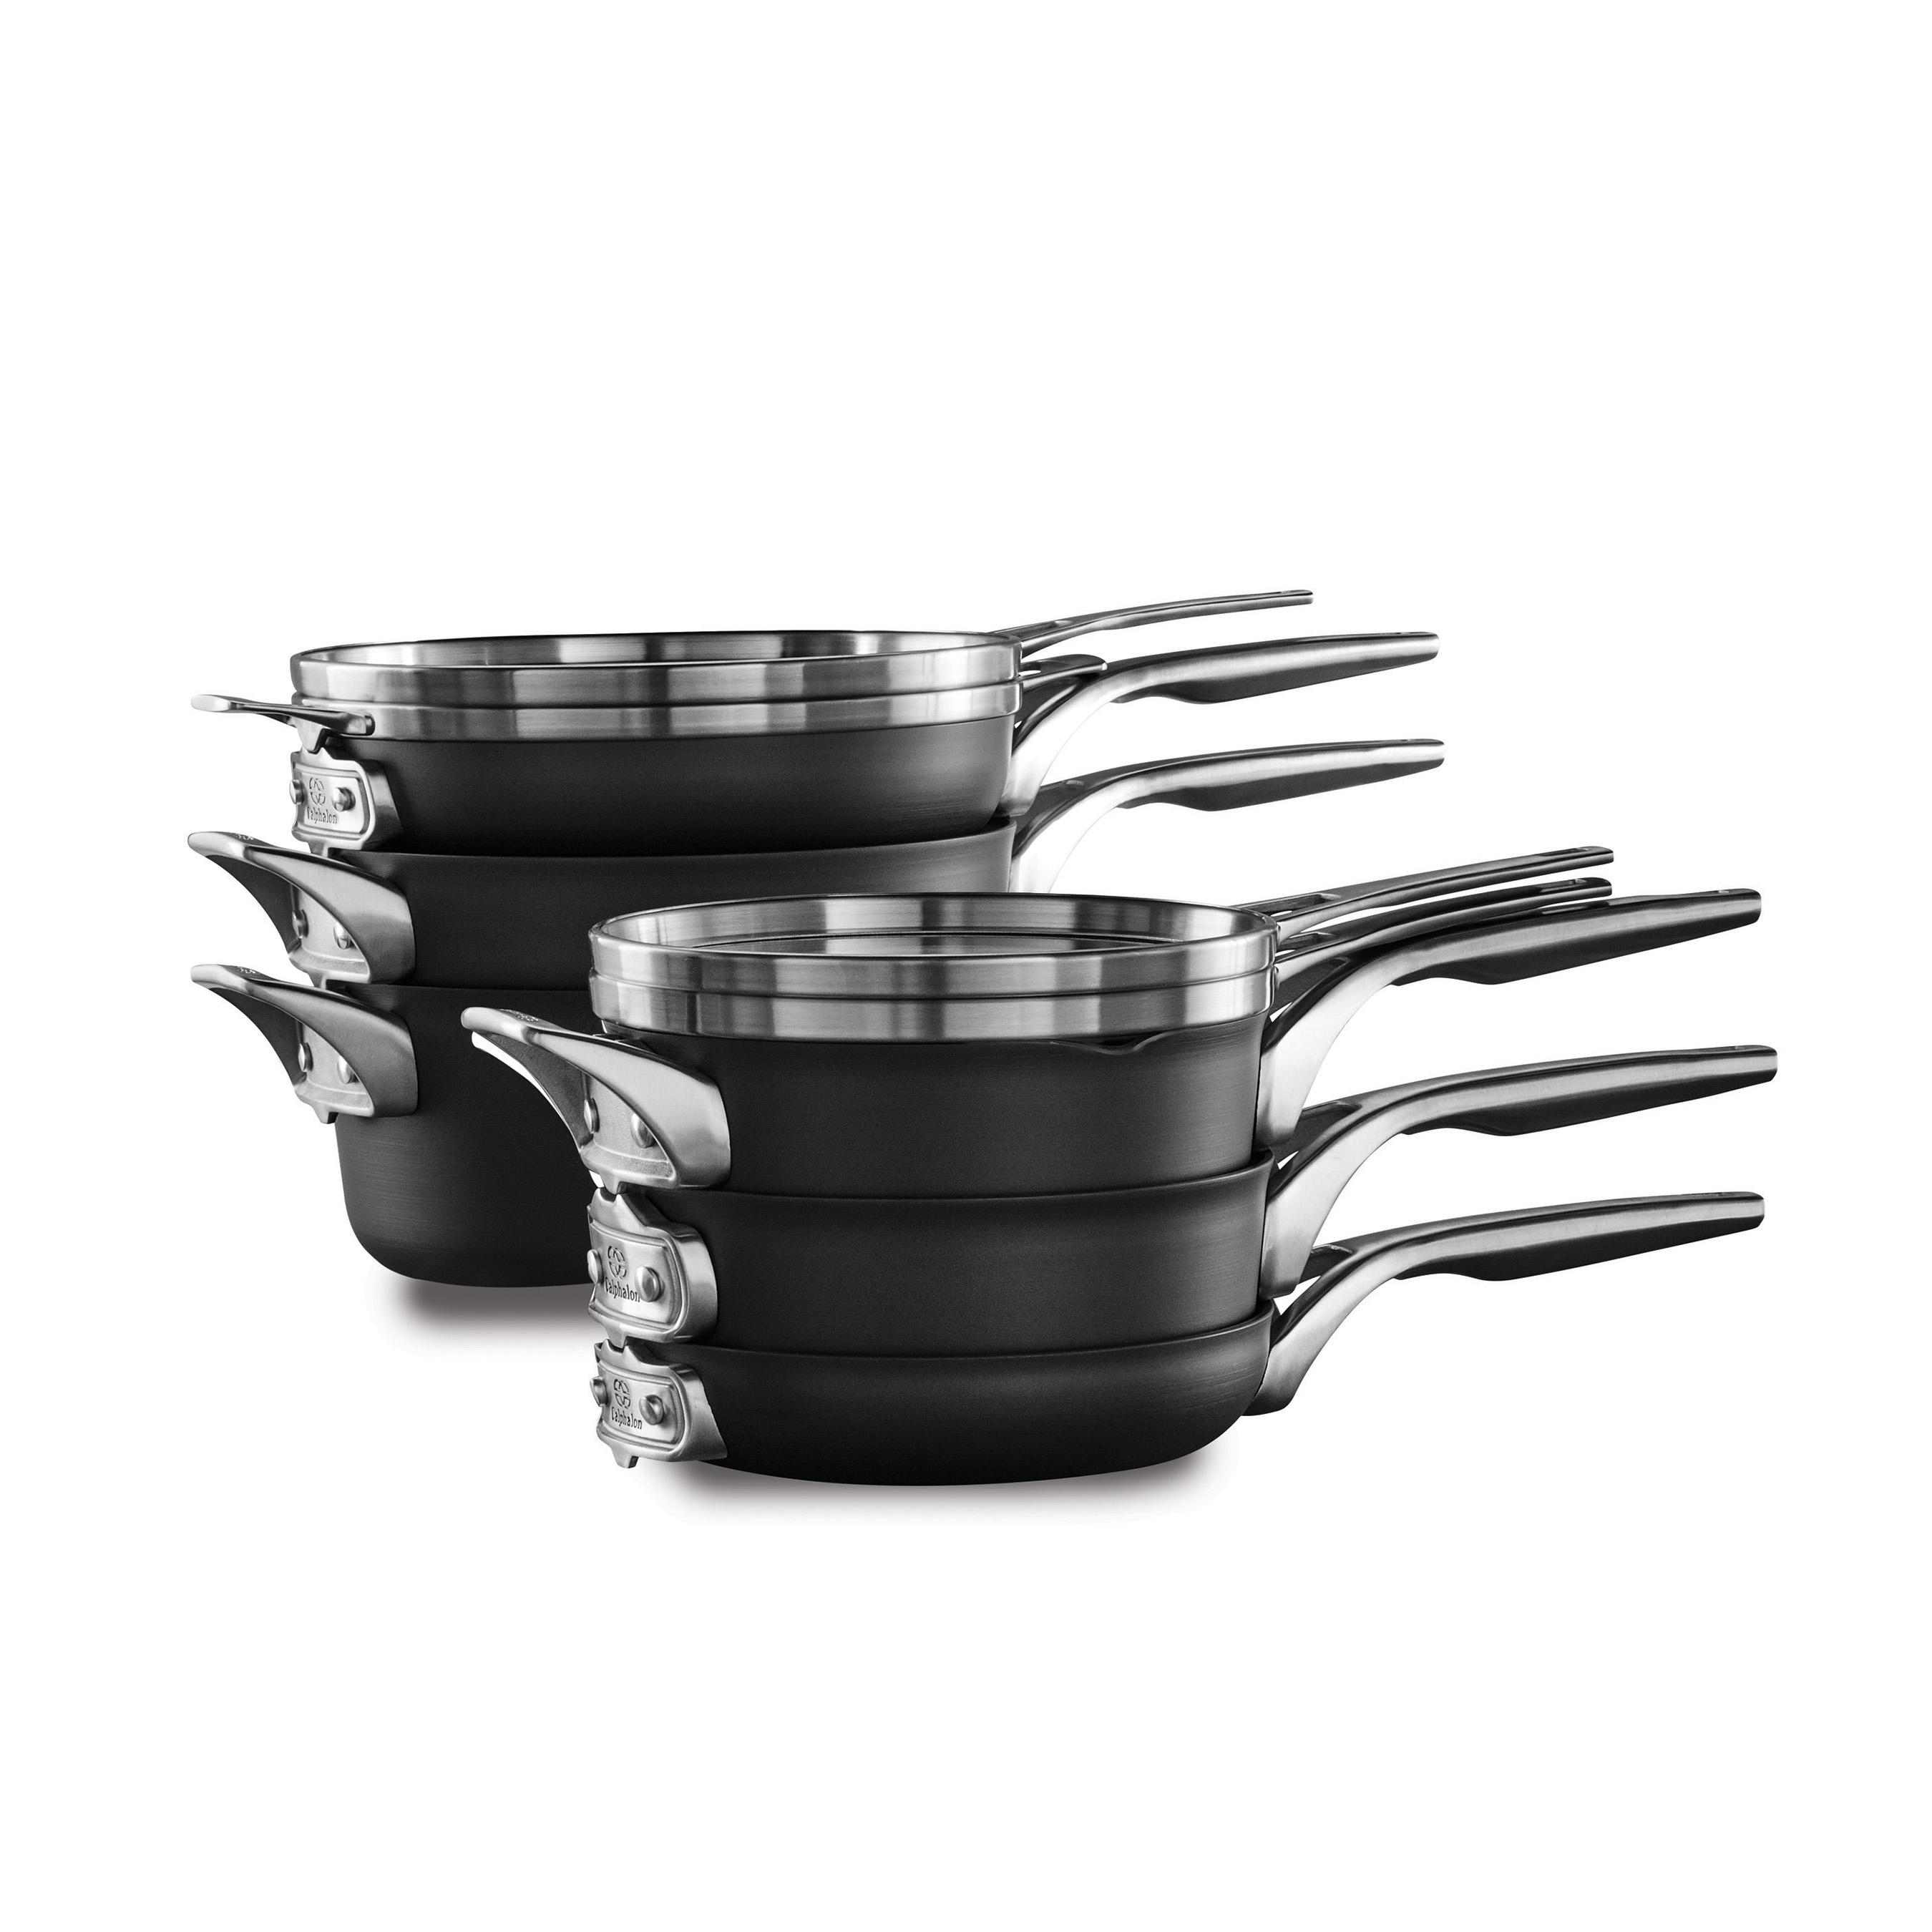 Calphalon Introduces Calphalon Premier™ Space Saving Nonstick and Stainless Steel Cookware